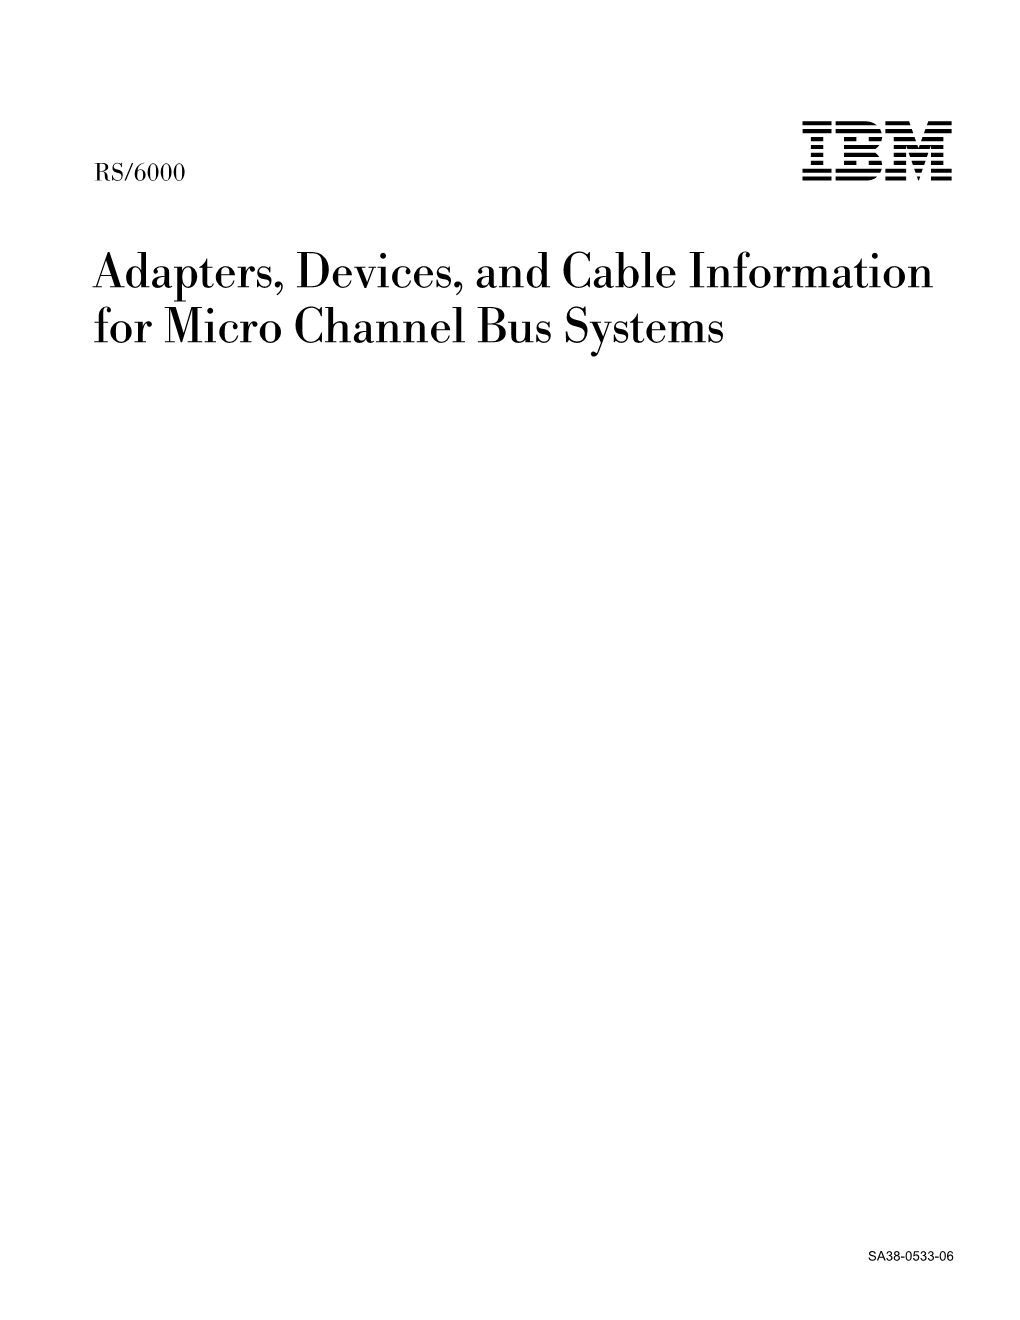 Adapters, Devices, and Cable Information for Micro Channel Bus Systems